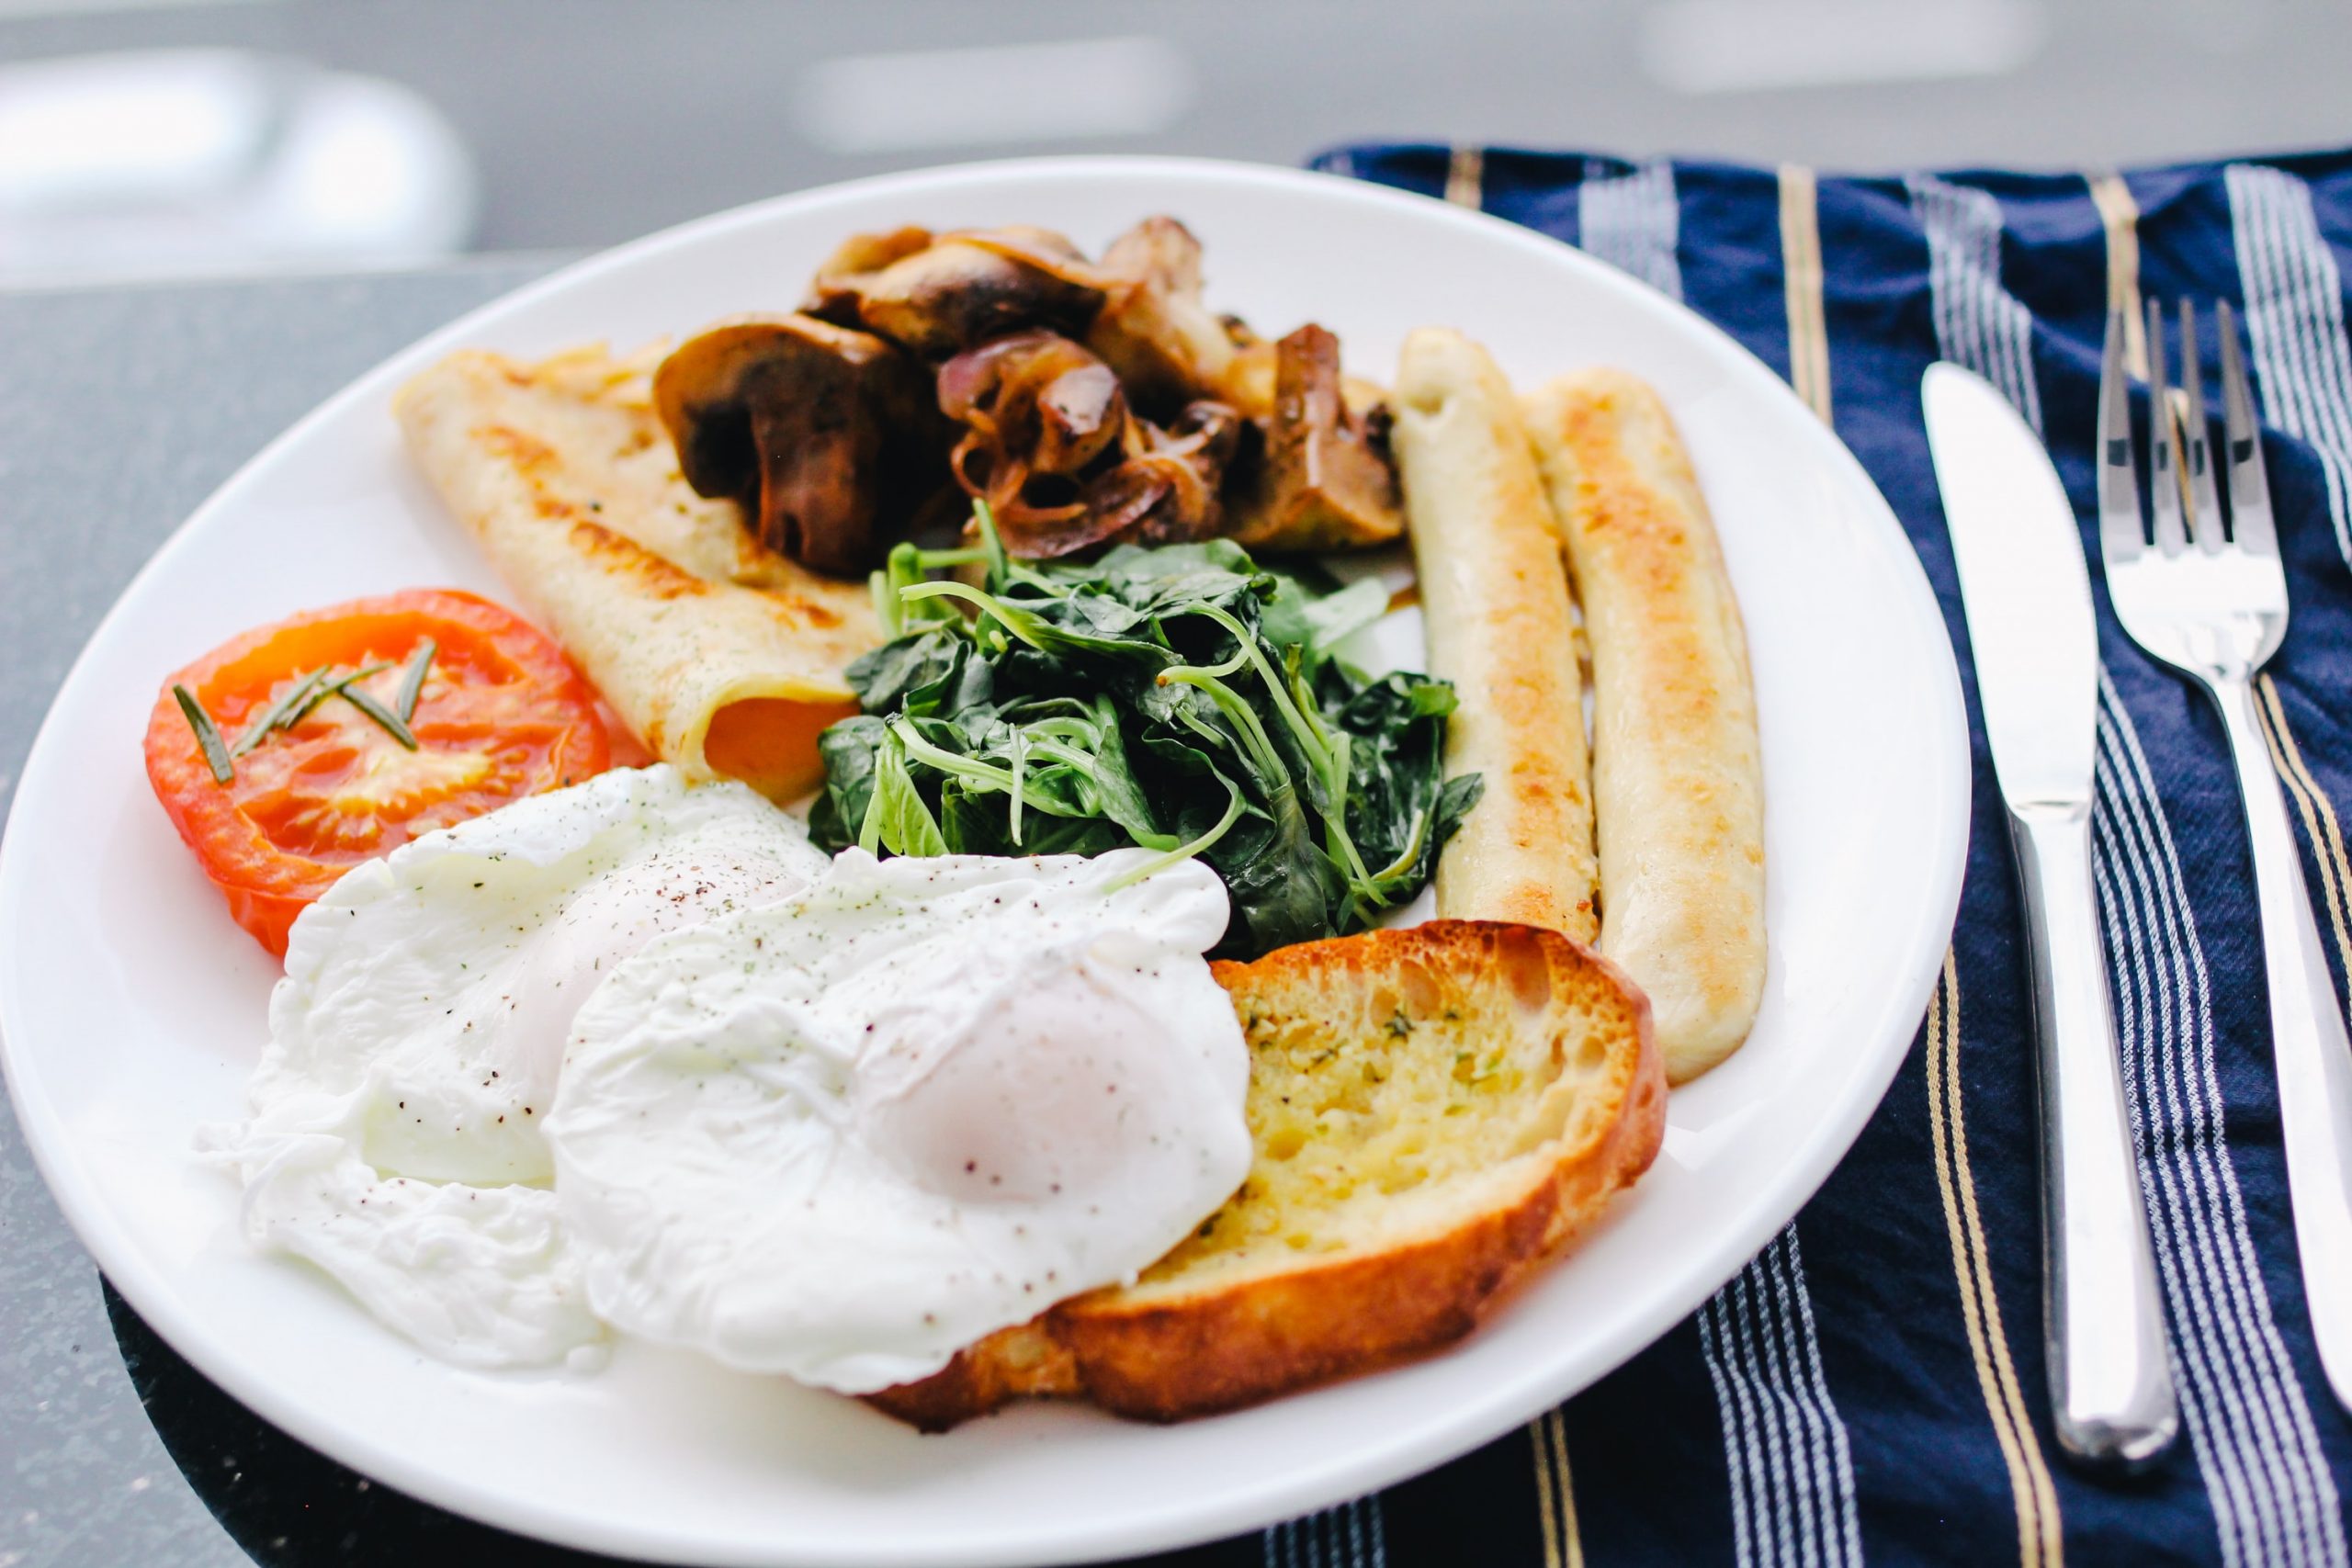 A cooked breakfast featuring healthier options.